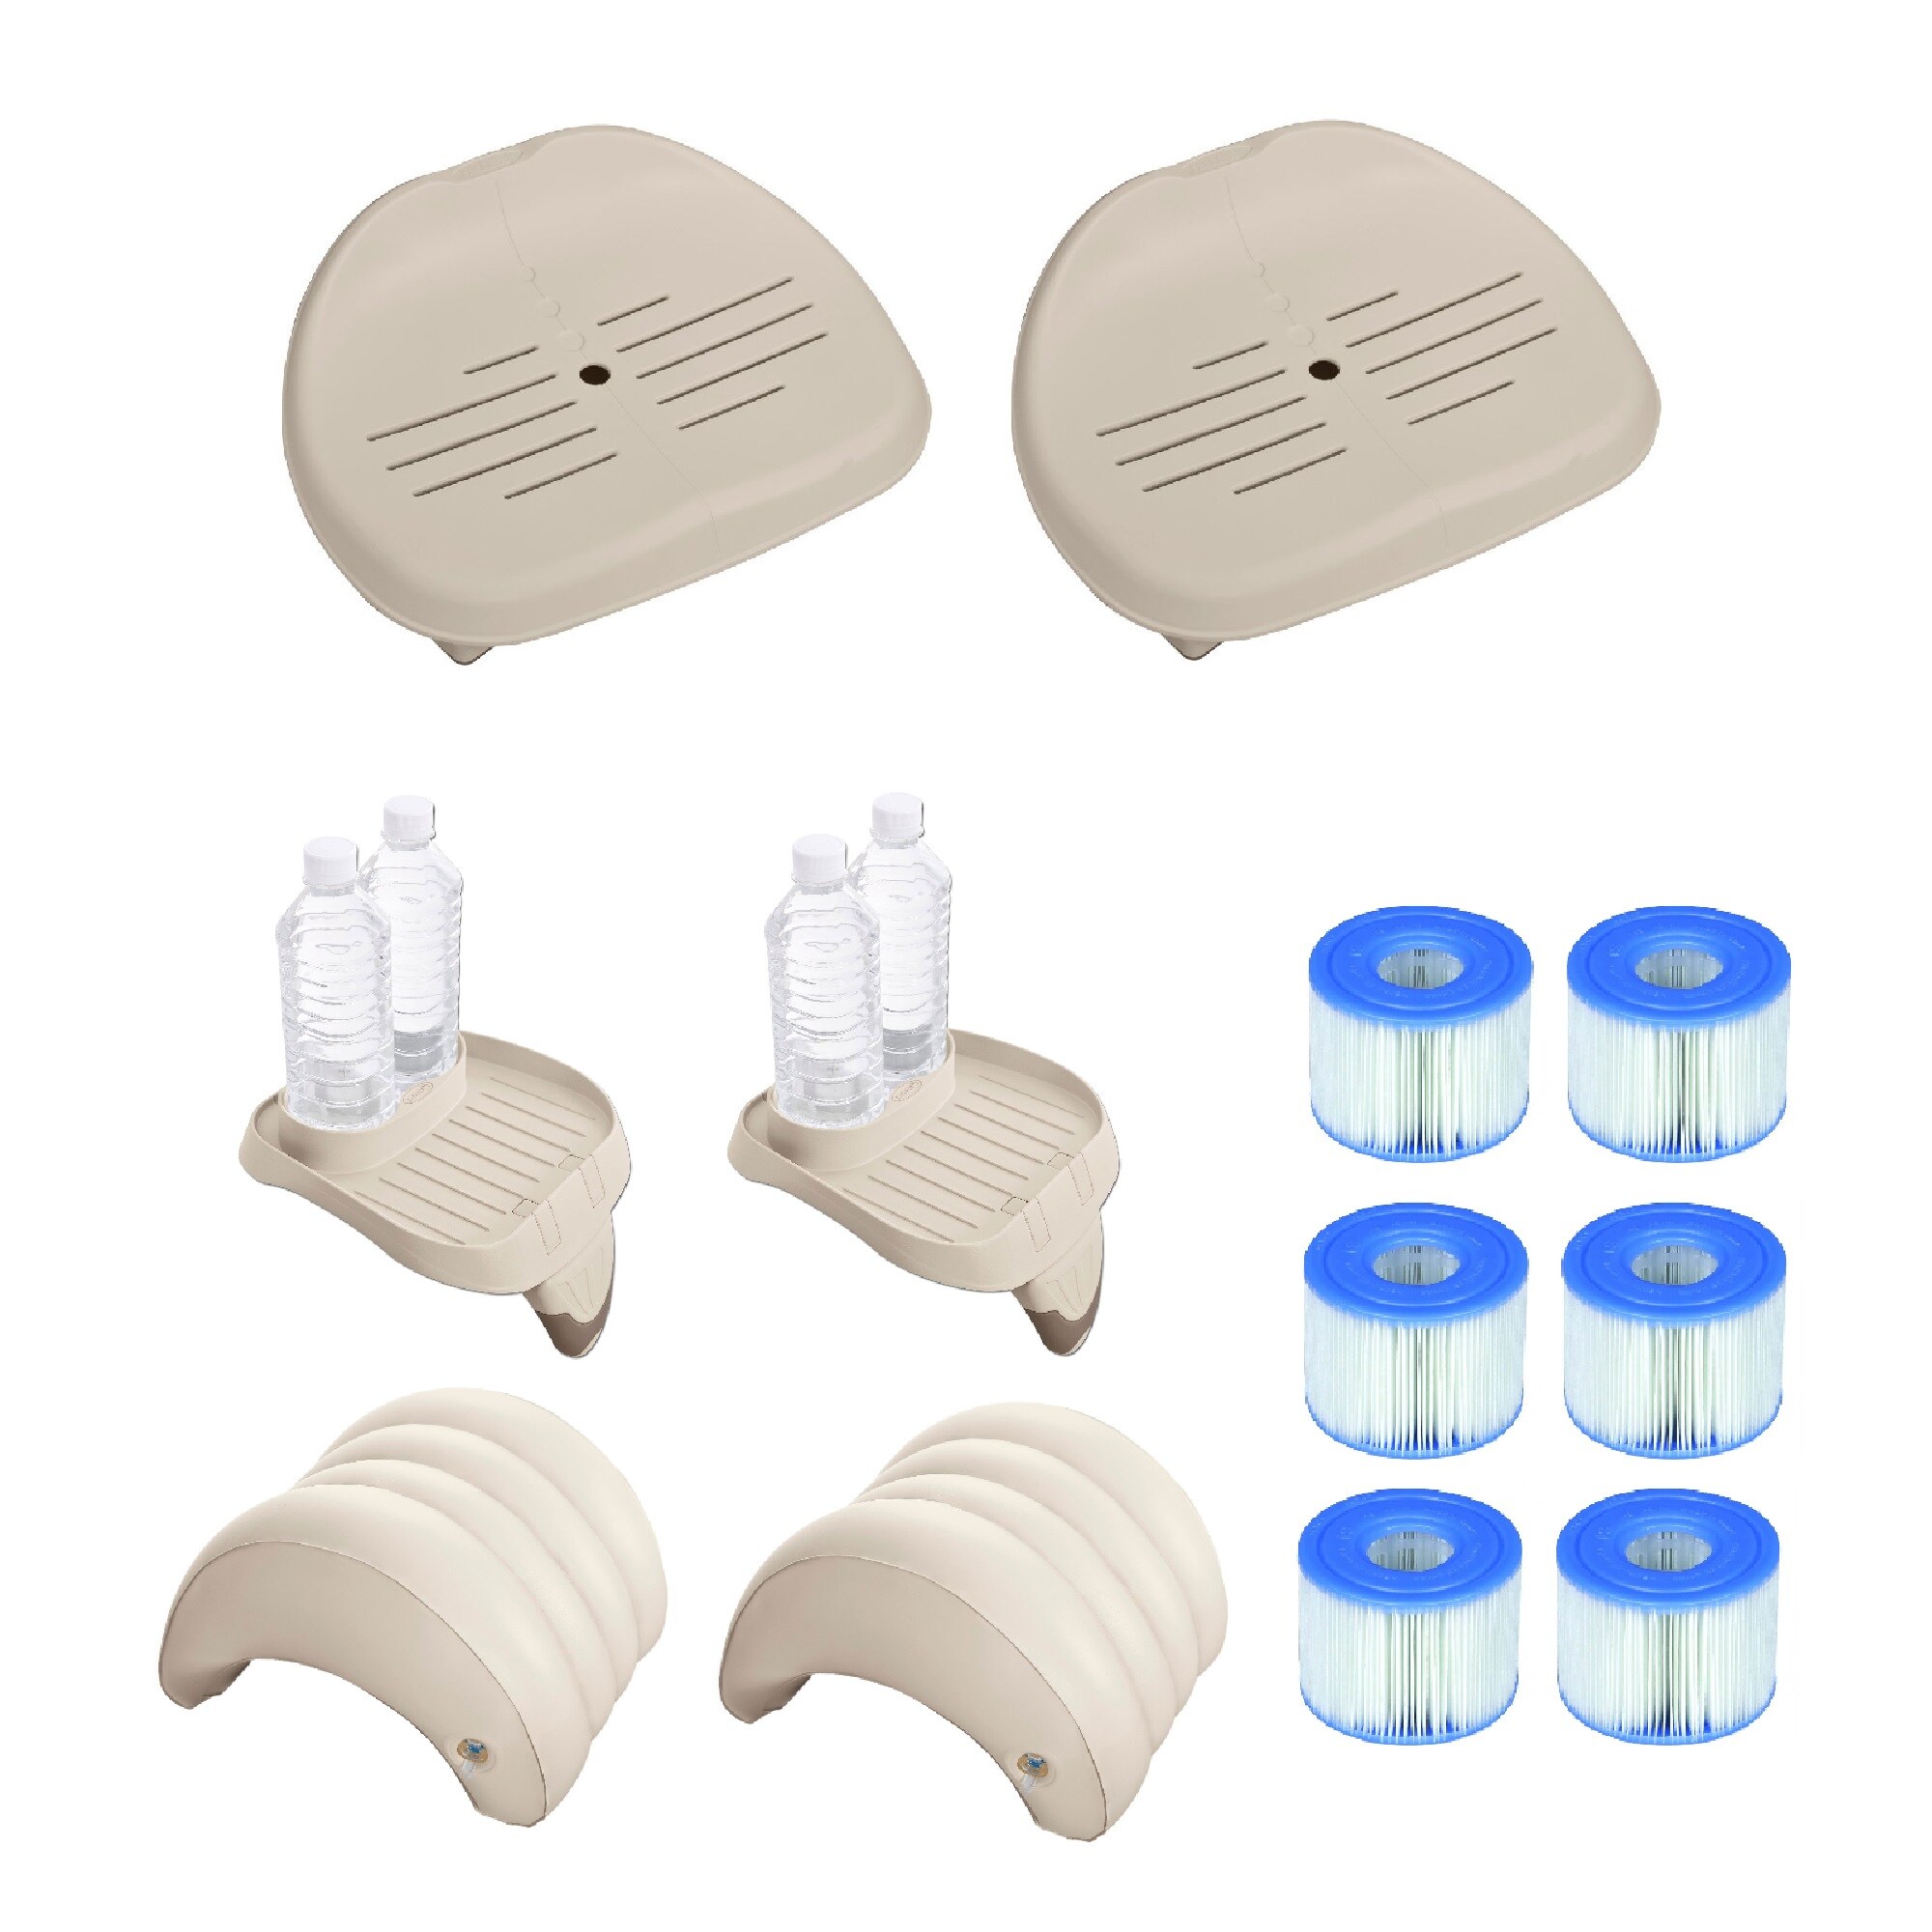 Intex Removable Slip-Resistant Seat For Inflatable Pure Spa Hot Tub 3 Pack 